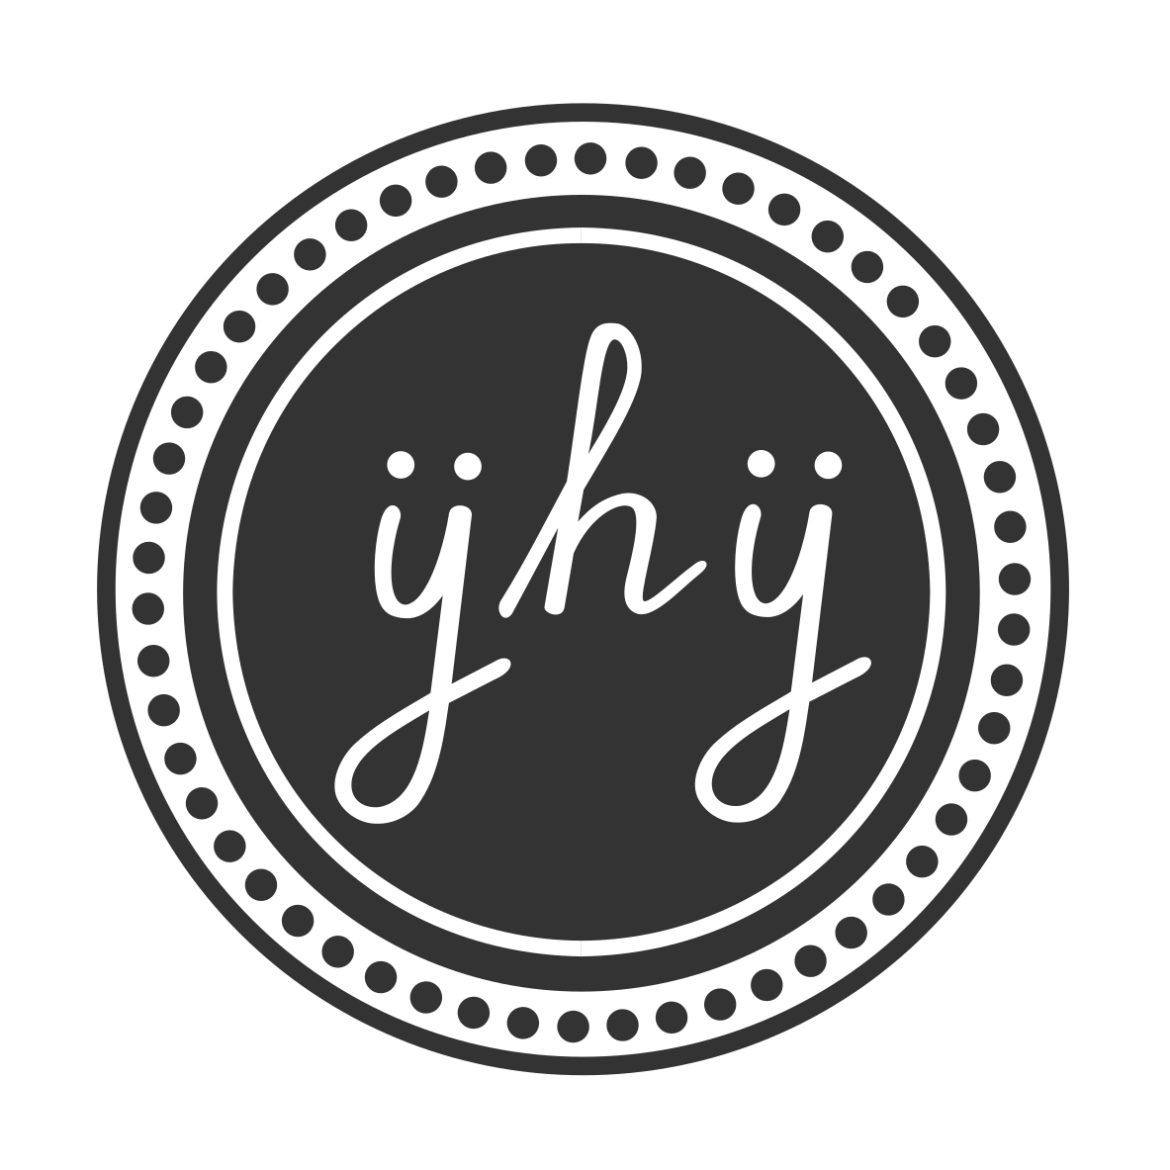 The Youth Helping Youth logo features the letters "y h y" in lowercase script with umlauts above both of the y's